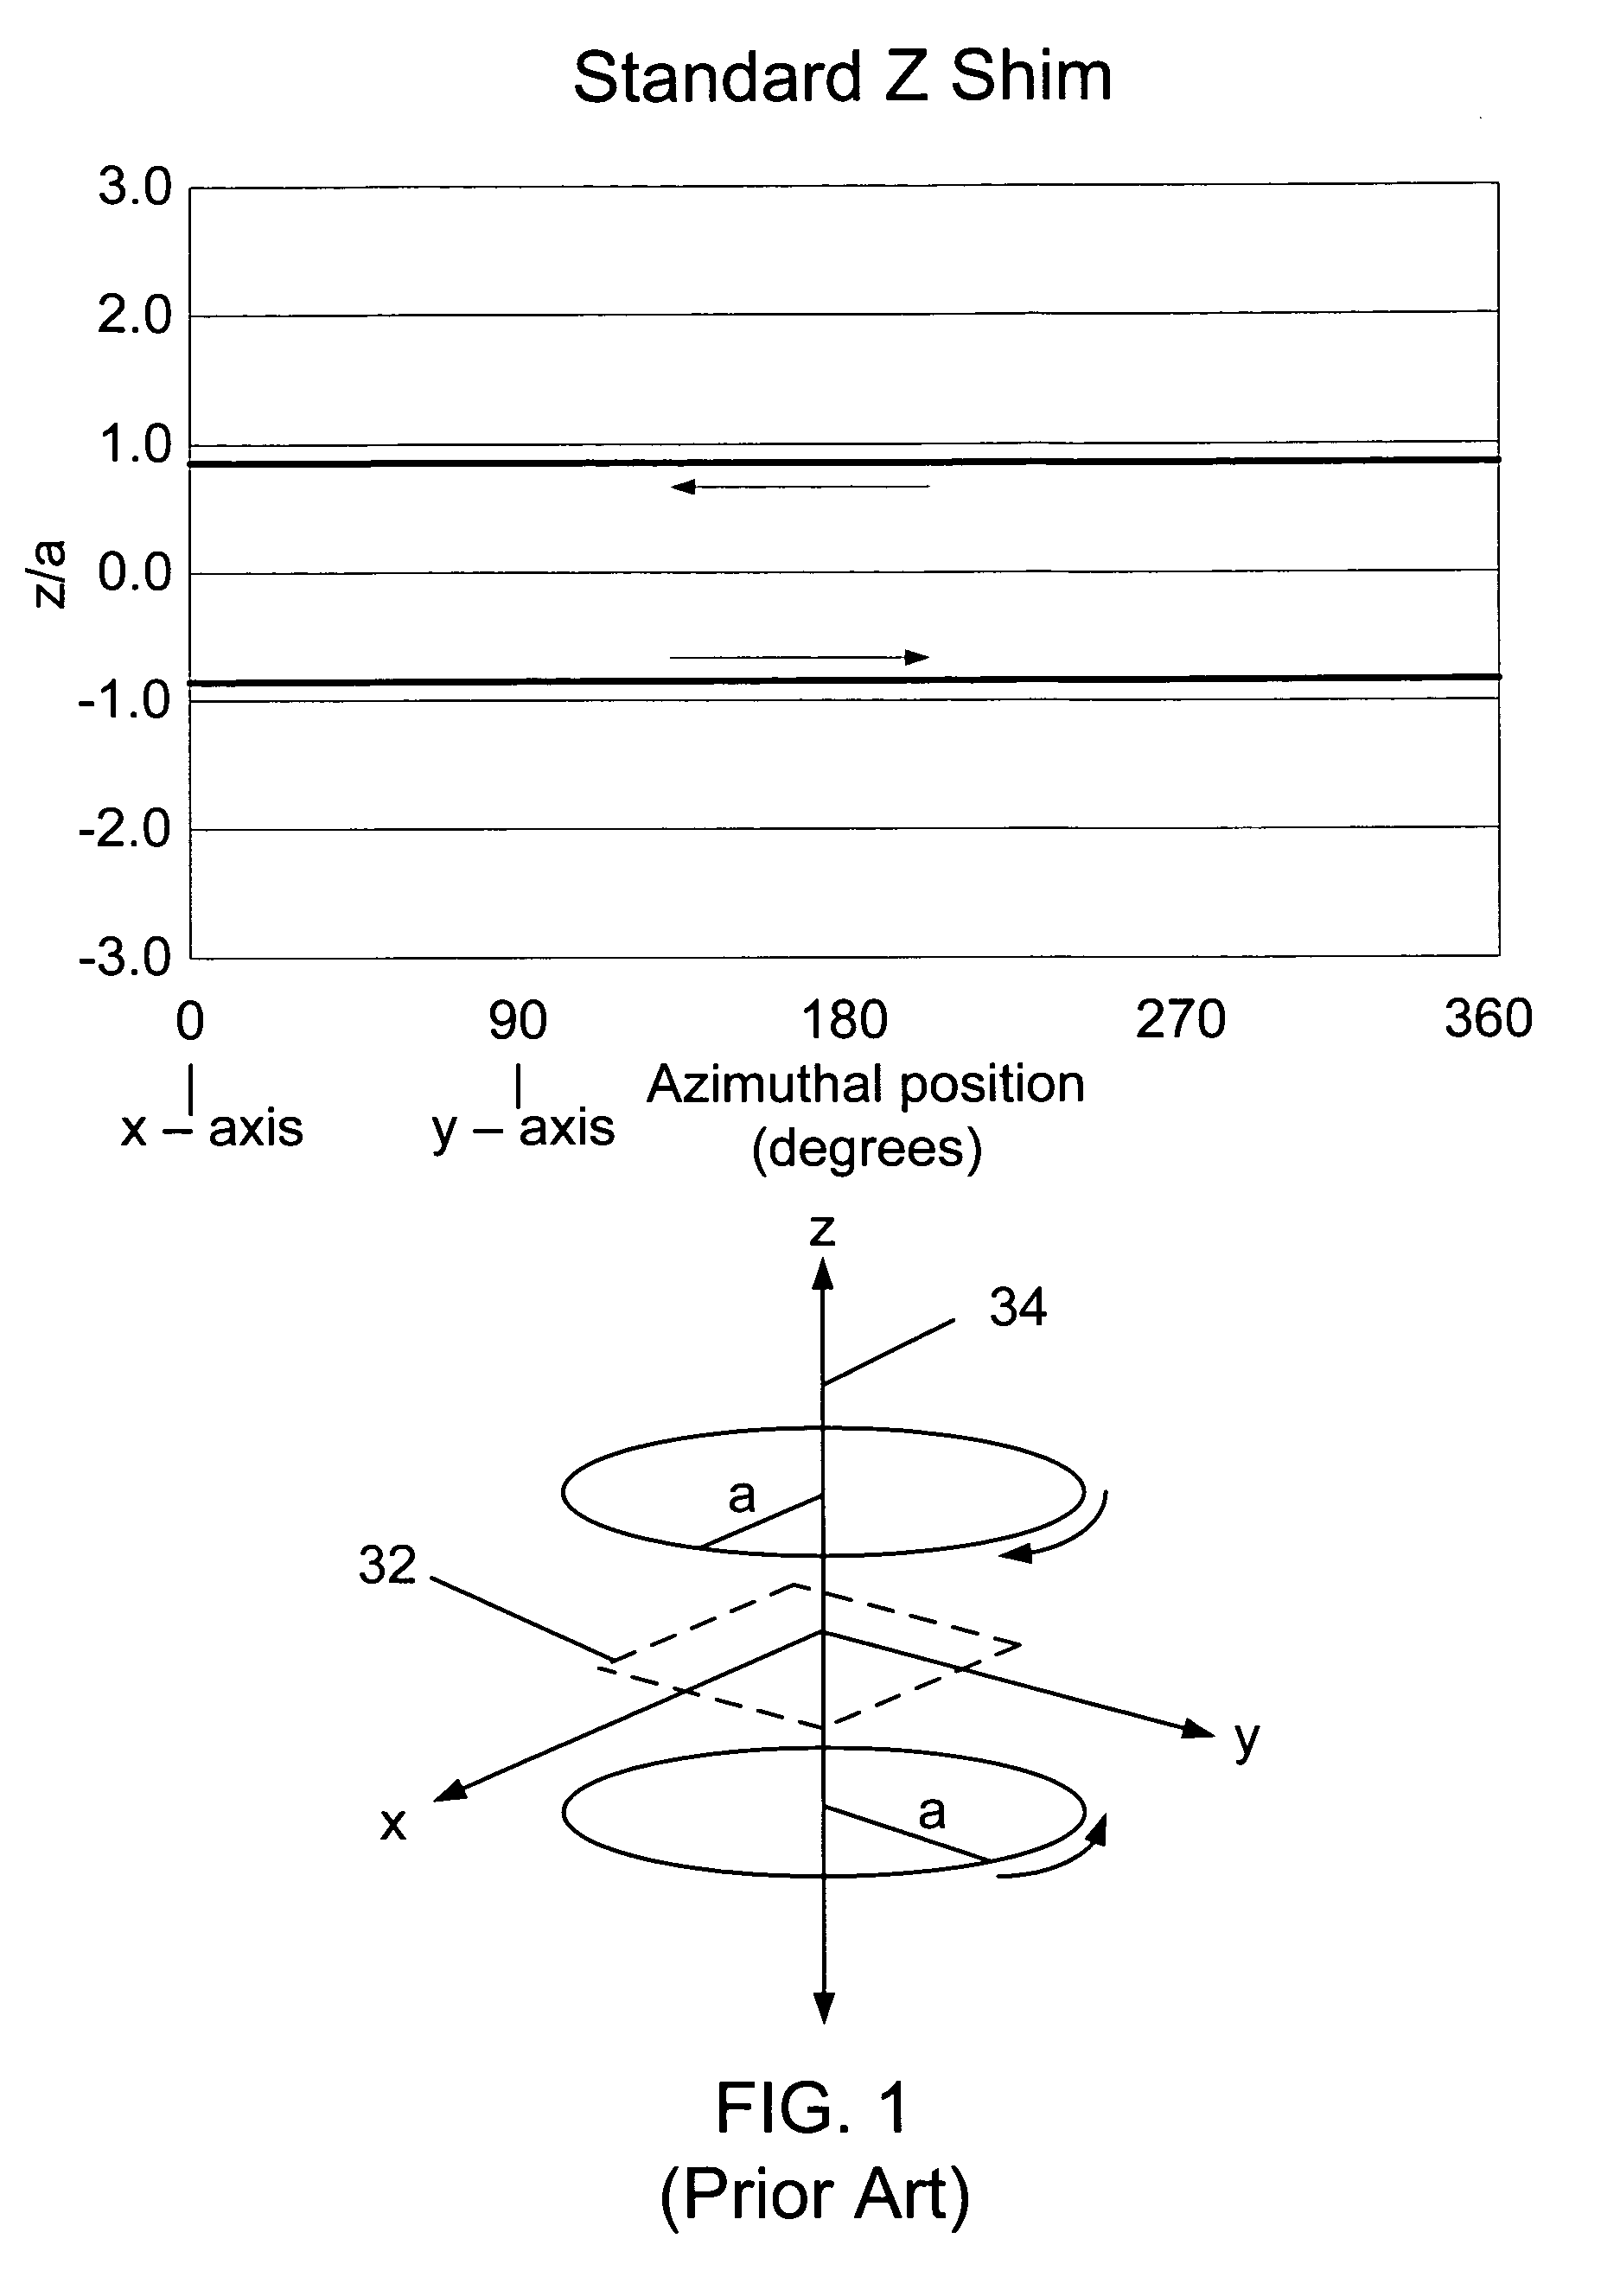 Magnetic shimming configuration with optimized turn geometry and electrical circuitry